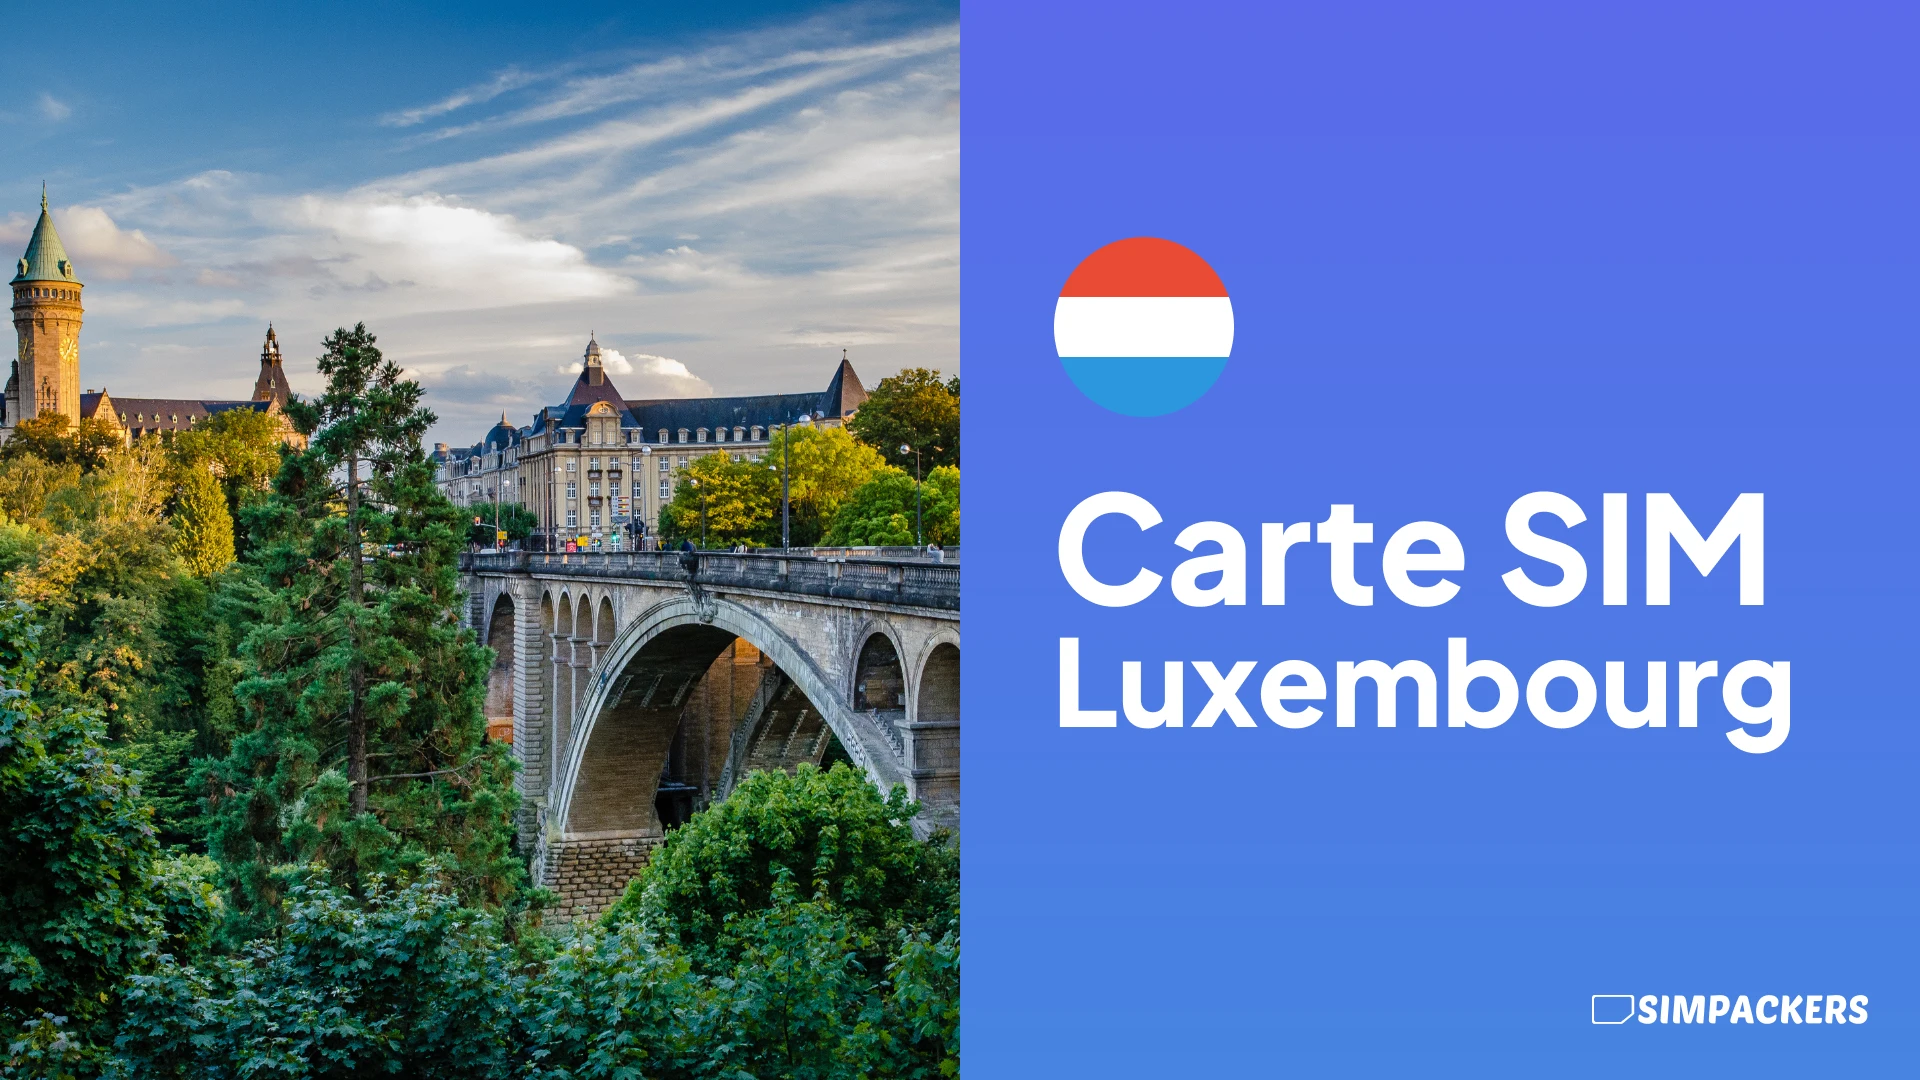 FR/FEATURED_IMAGES/carte-sim-luxembourg.webp